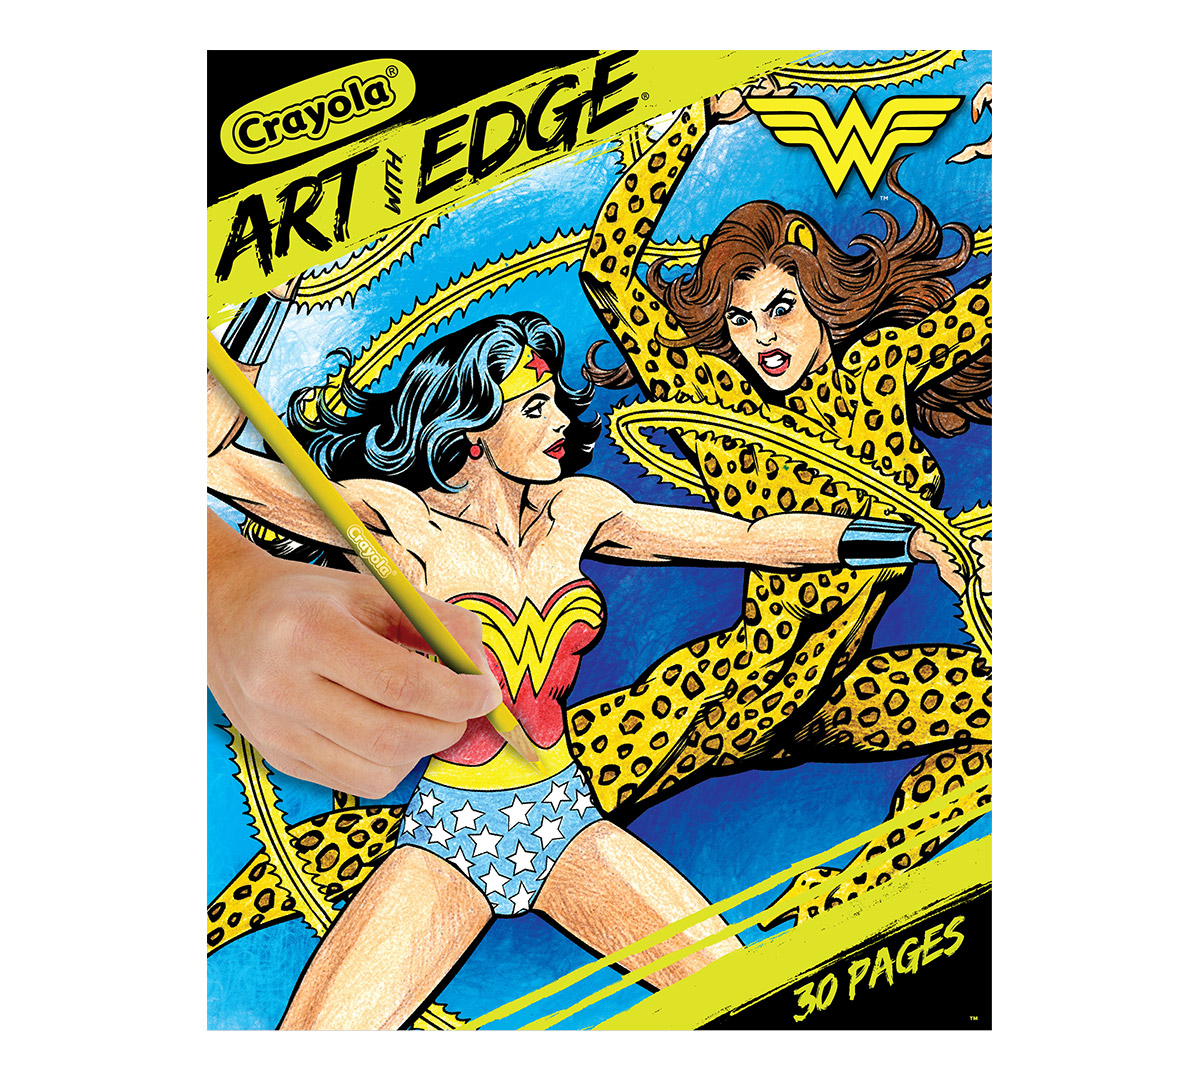 Crayola Art With Edge Dc Comics Wonder Woman 30 Coloring Pages 8 X 10 Premium Paper Great For Use With Art With Edge Coloring Tools Crayola